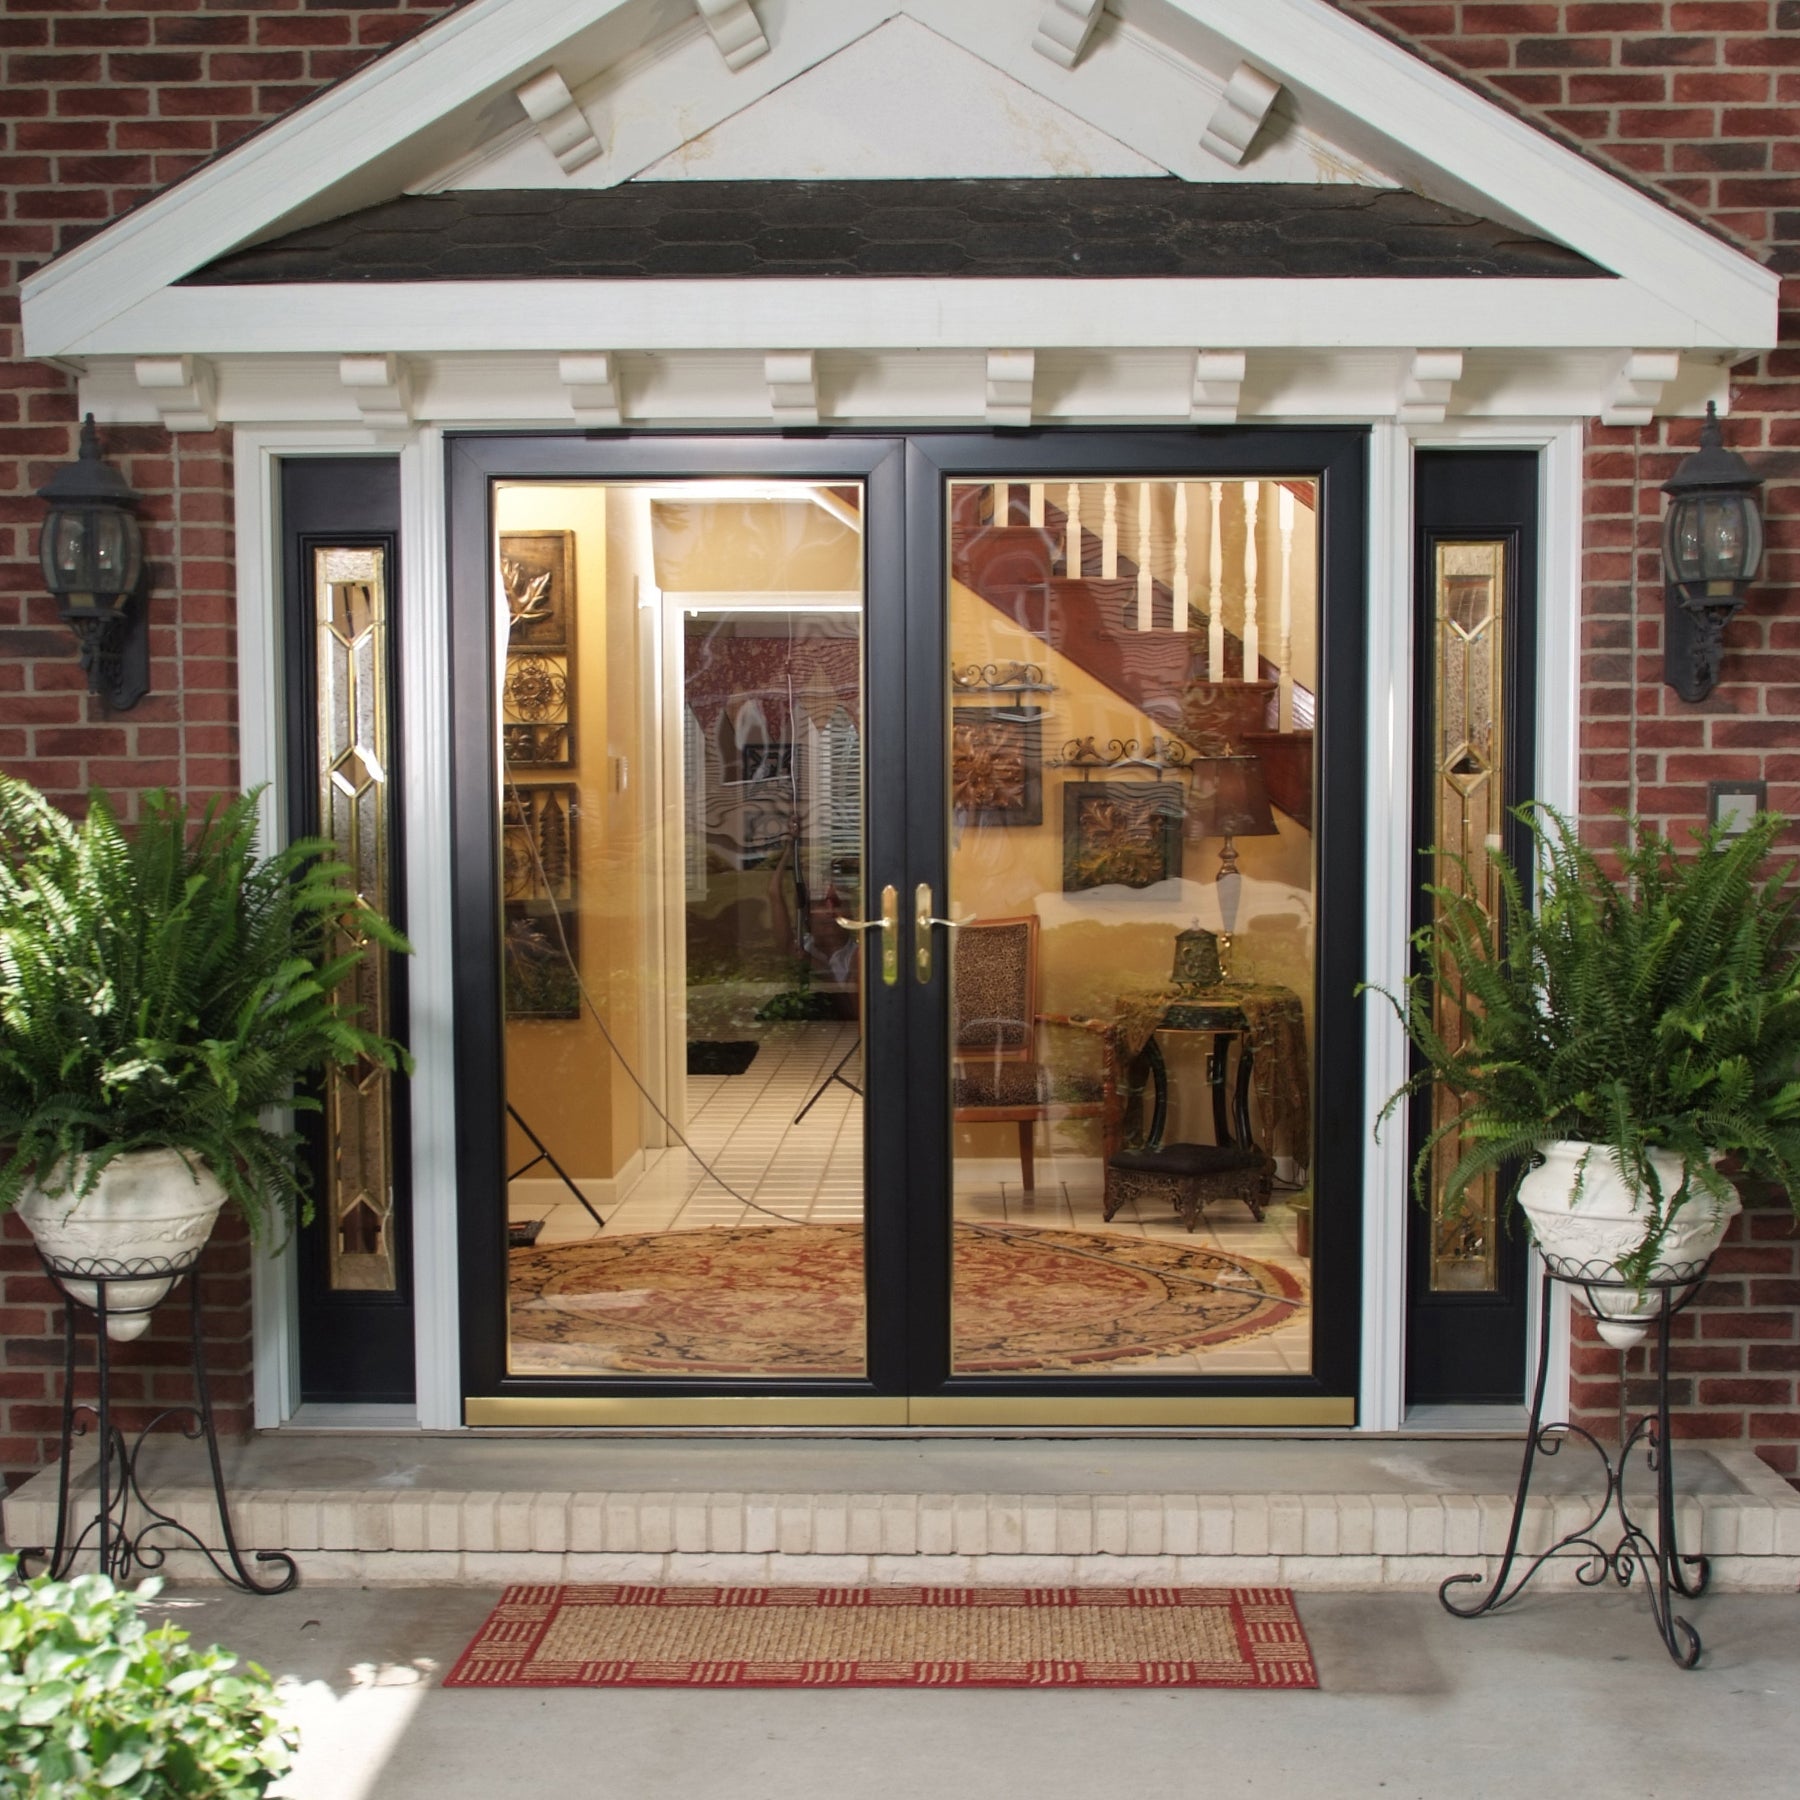 gloryirondoors one panel glass iron entry doors with insulation keeping house warm